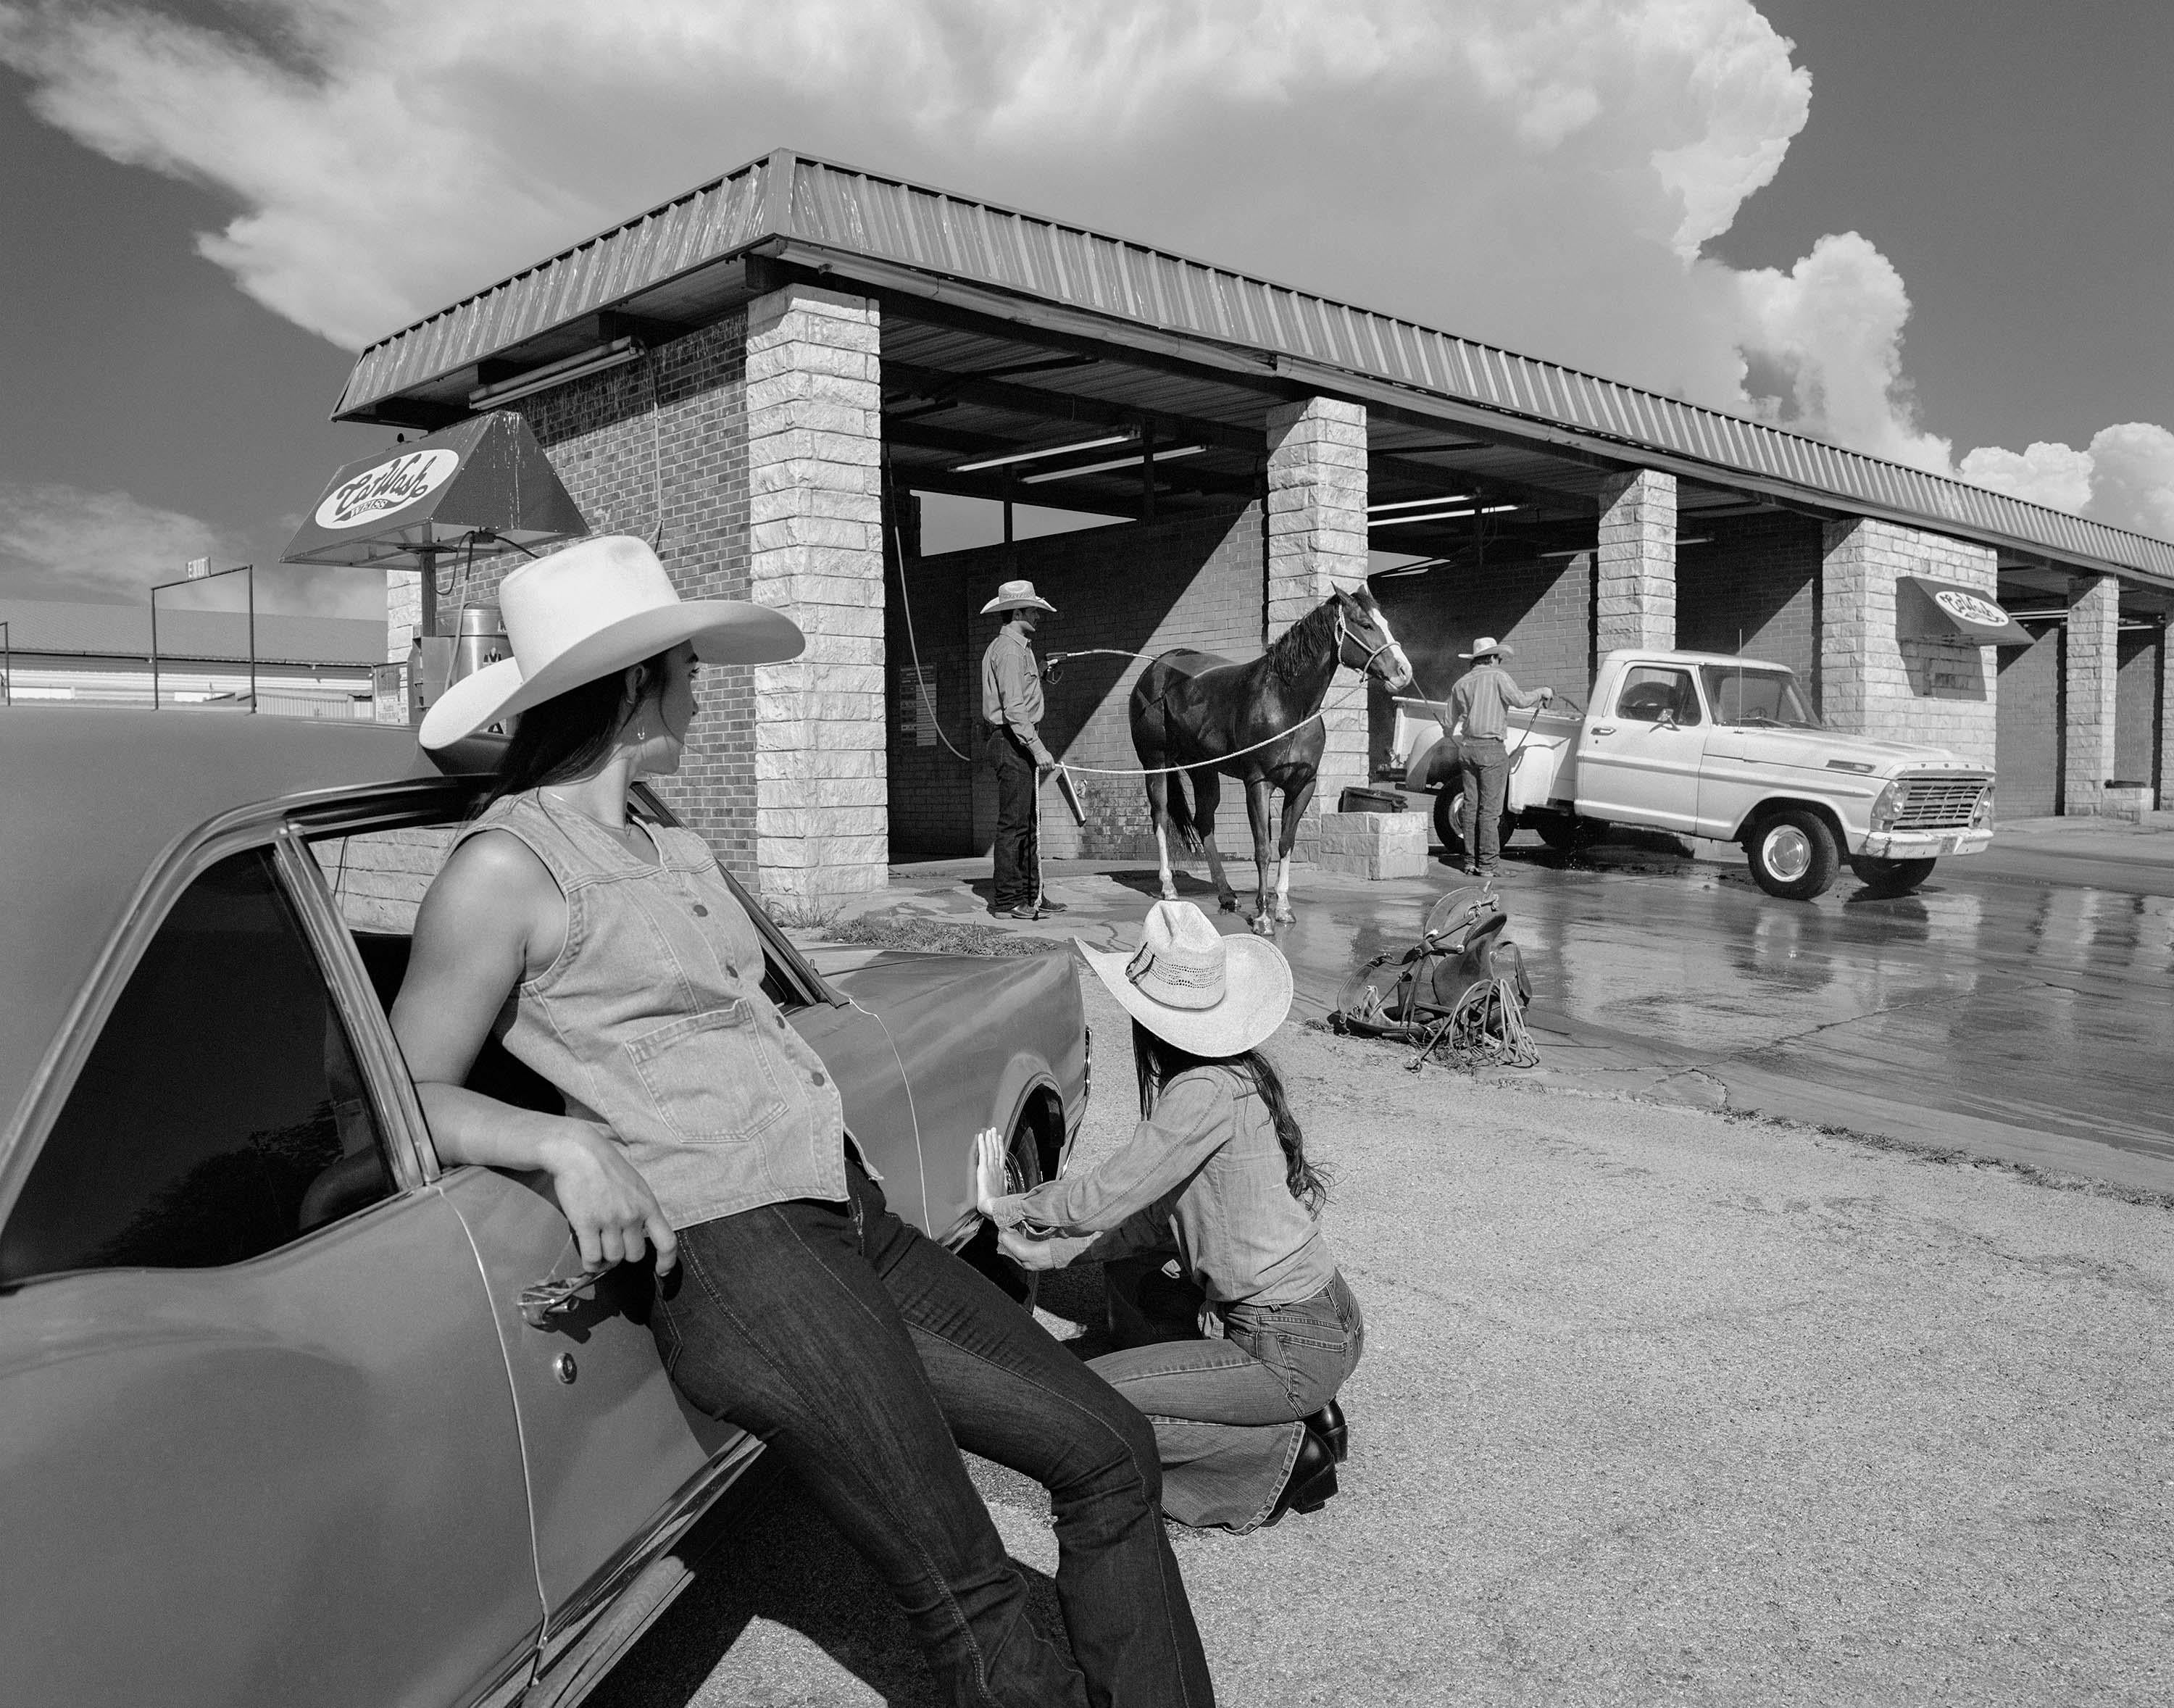 Carwash '78 - Contemporary Photograph by Beau Simmons